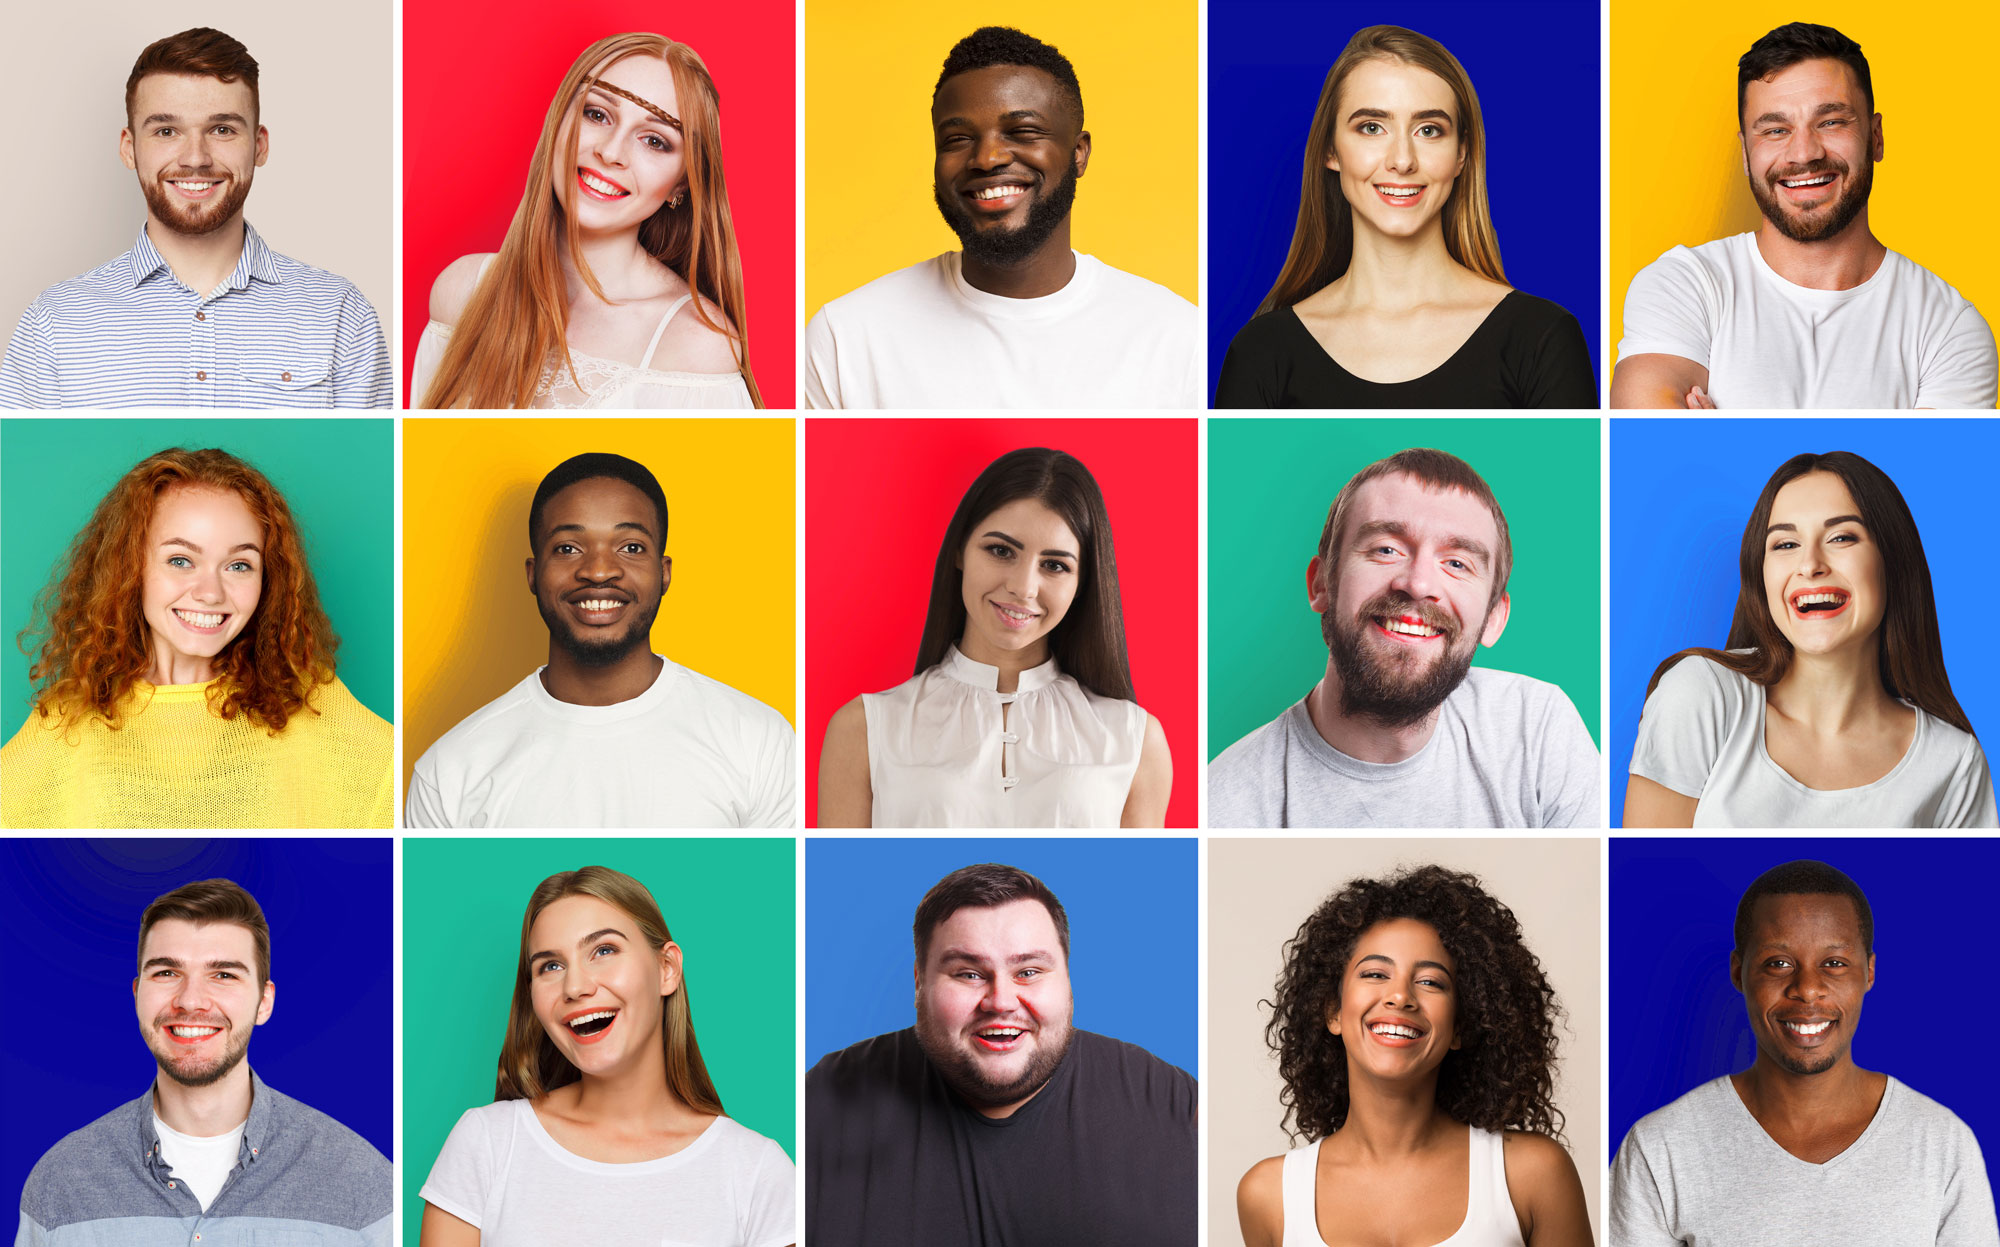 Background image with a group of diverse people